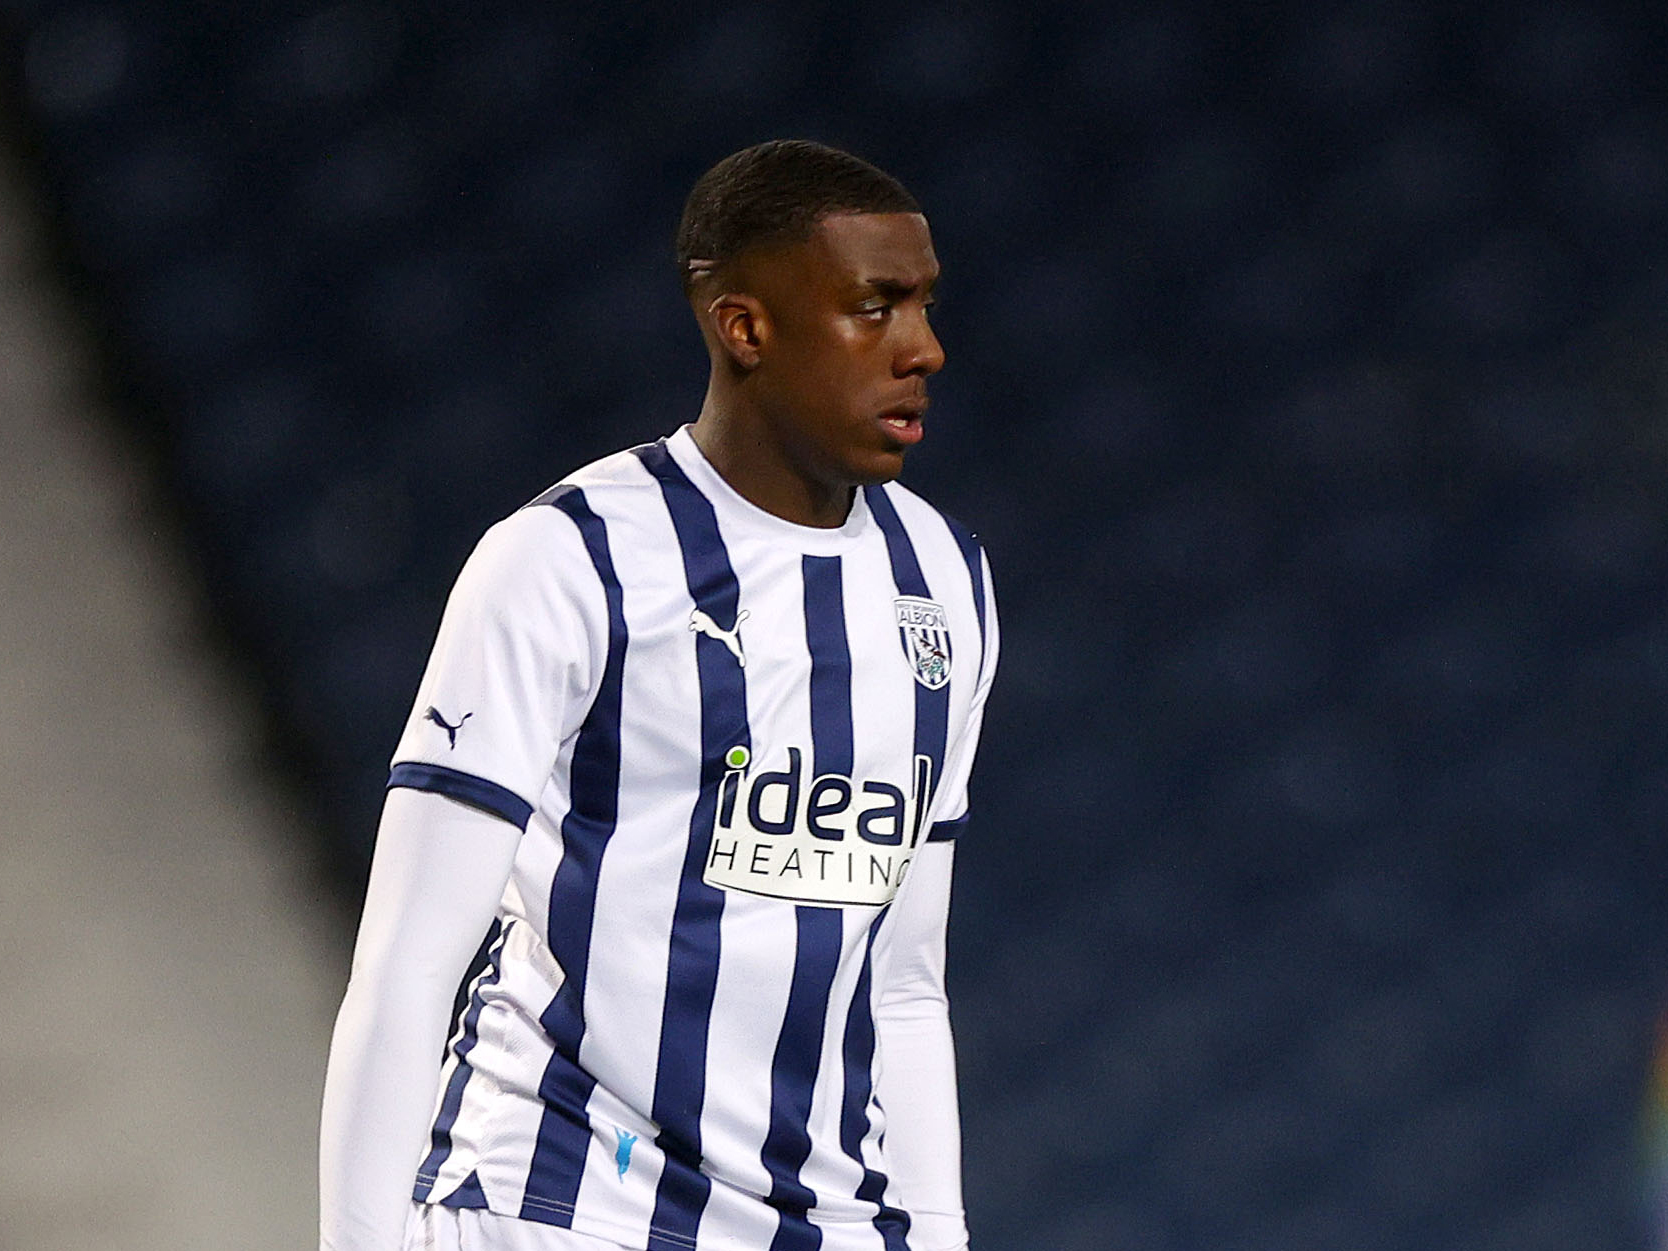 Souleyman Mandey in action for Albion's U18 side